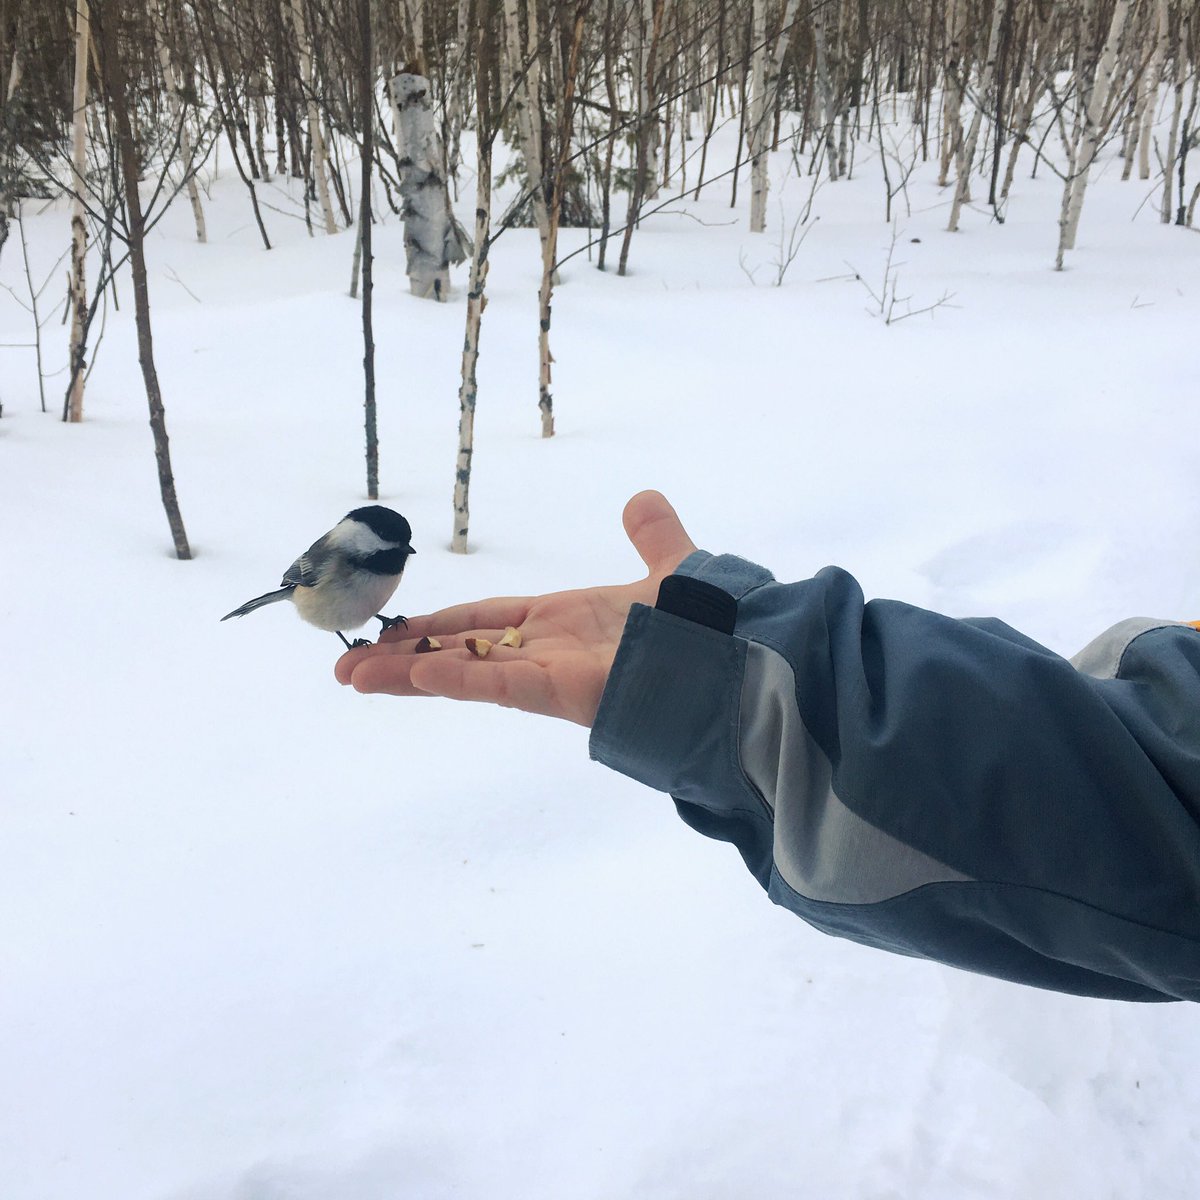 Leesa Bringas offers some #almond bits to a #chickadee during an afternoon walk along the #trails at the #LaurentianConservationArea. The conservation area was busy Sunday afternoon as #WarmTemperatures and #BlueSkies welcomed #walkers and #skiers. #Sudbury #NorthernOntario